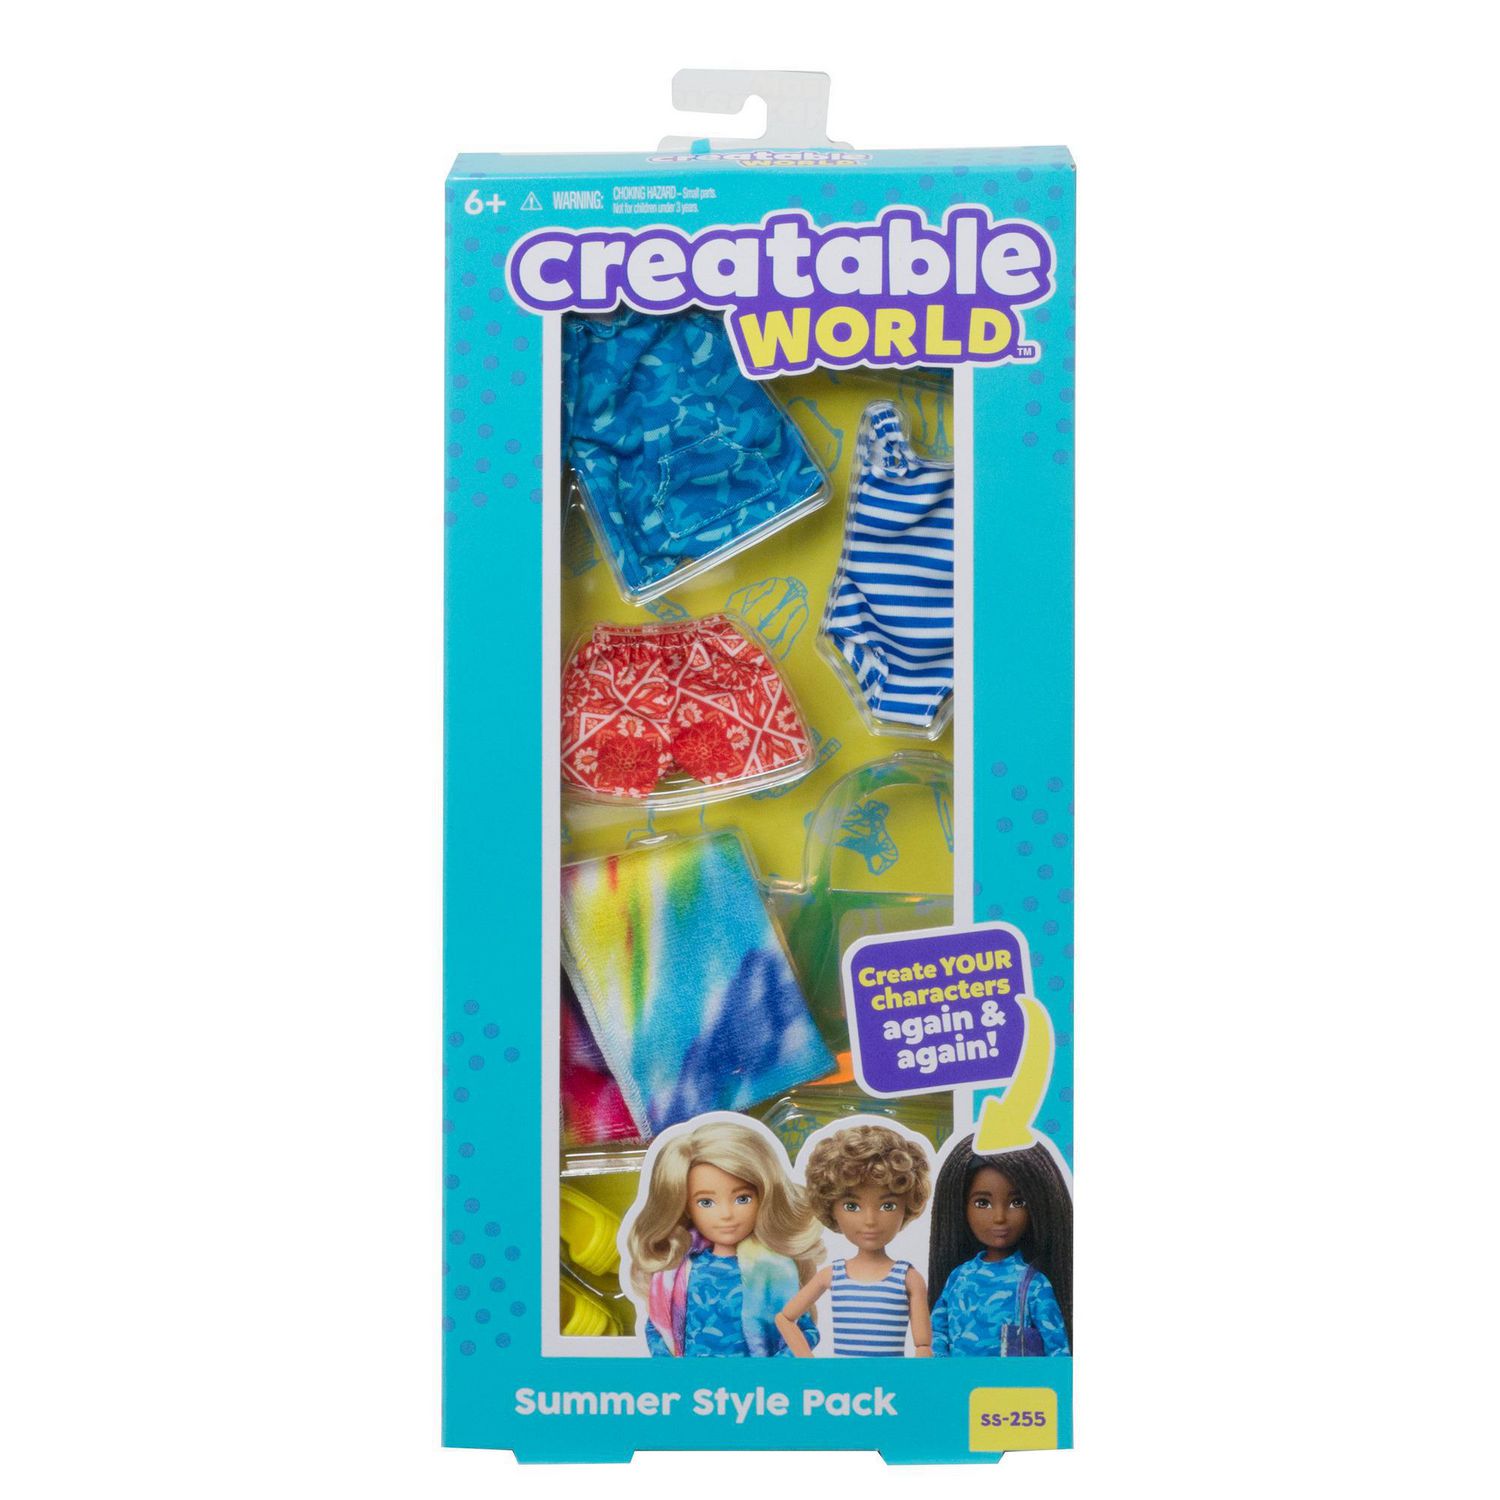 Mattel Creatable World Summer Style Pack Clothing Accessories Ss-255 for sale online 